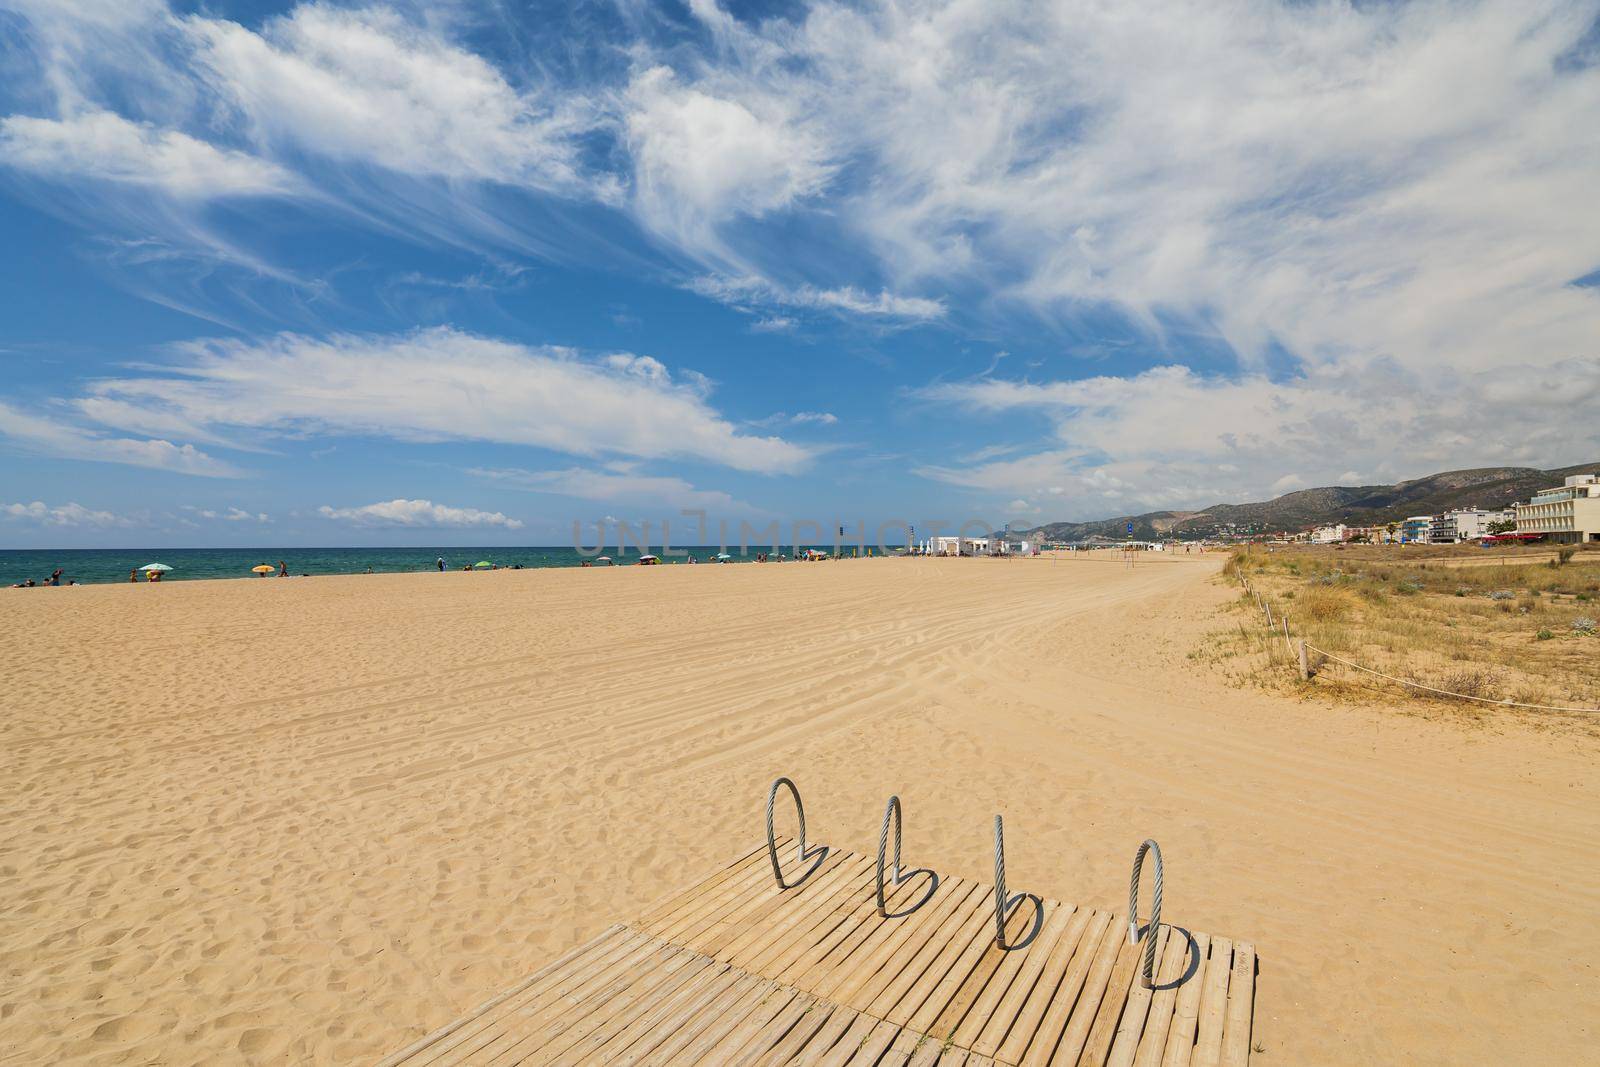 Castelldefels beach with sand dunes and stand for bicycles. Sunny day with blue sea and sky. by apavlin